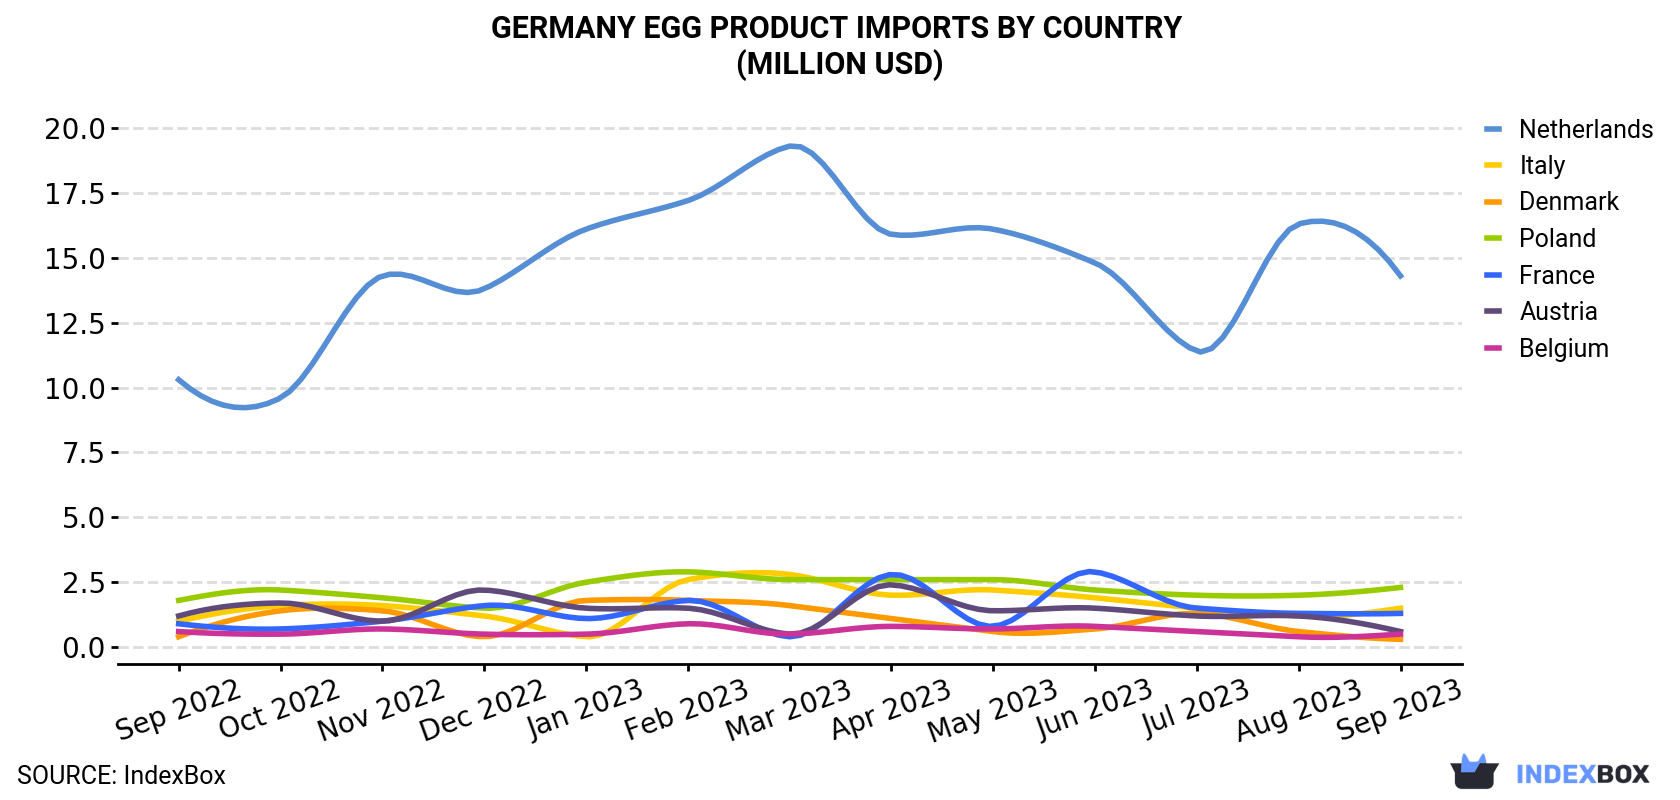 Germany Egg Product Imports By Country (Million USD)